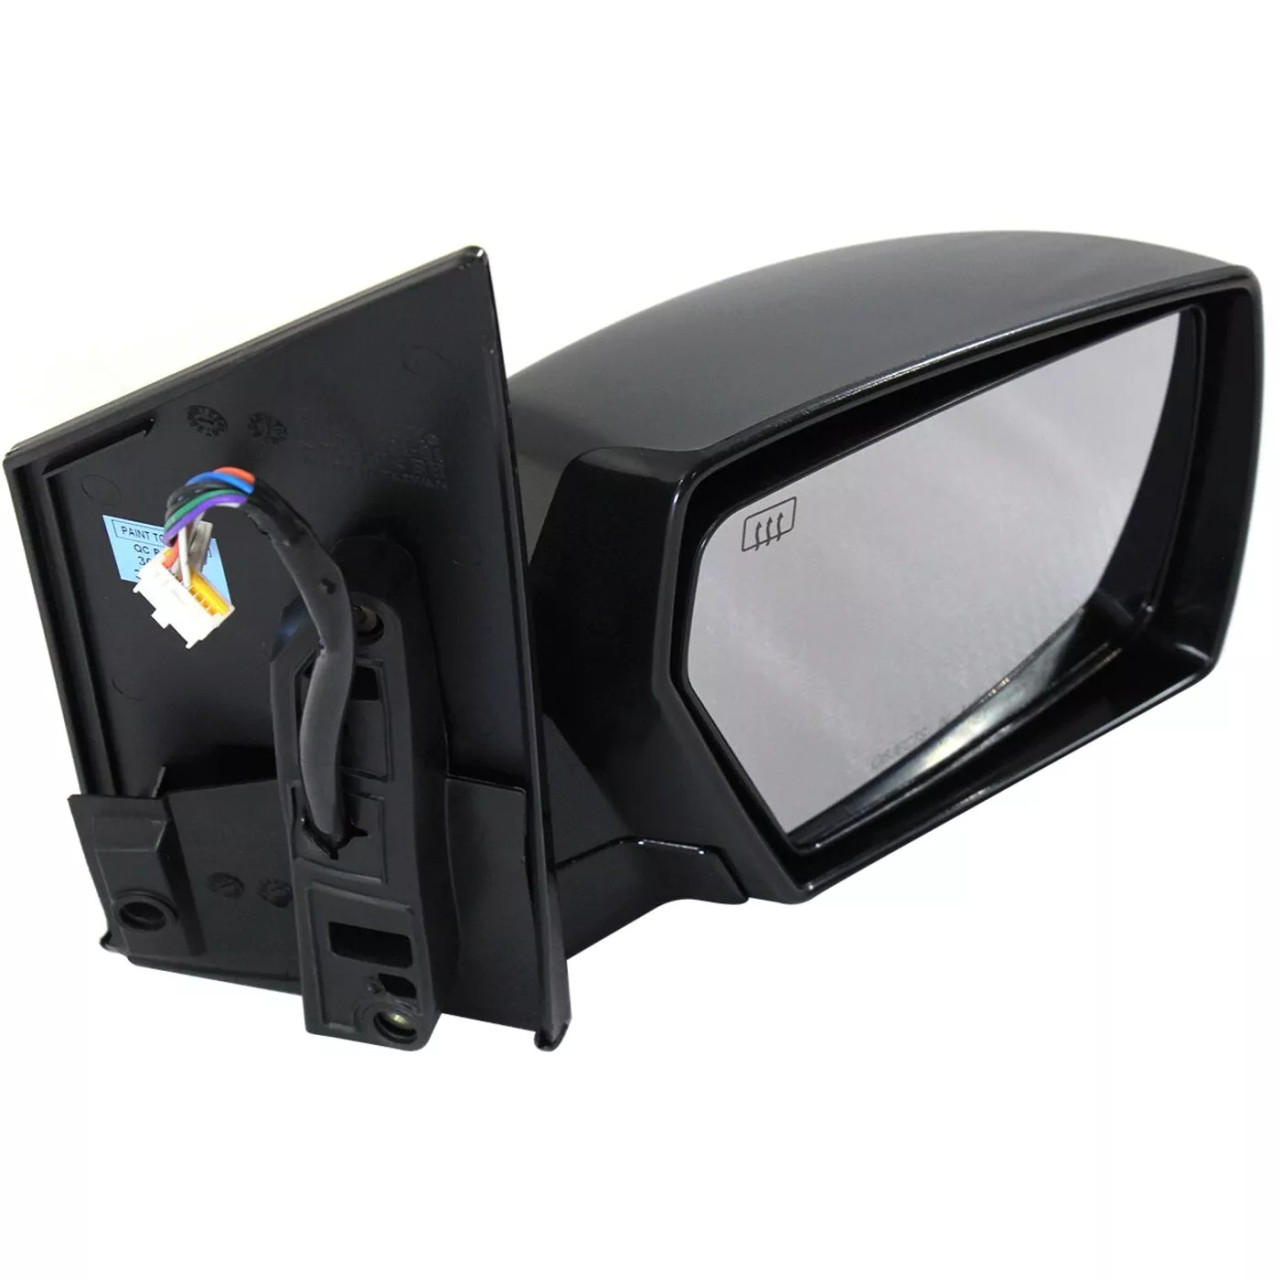 Power Heated Mirrors For 2009 Nissan Quest Driver and Passenger Side Paintable